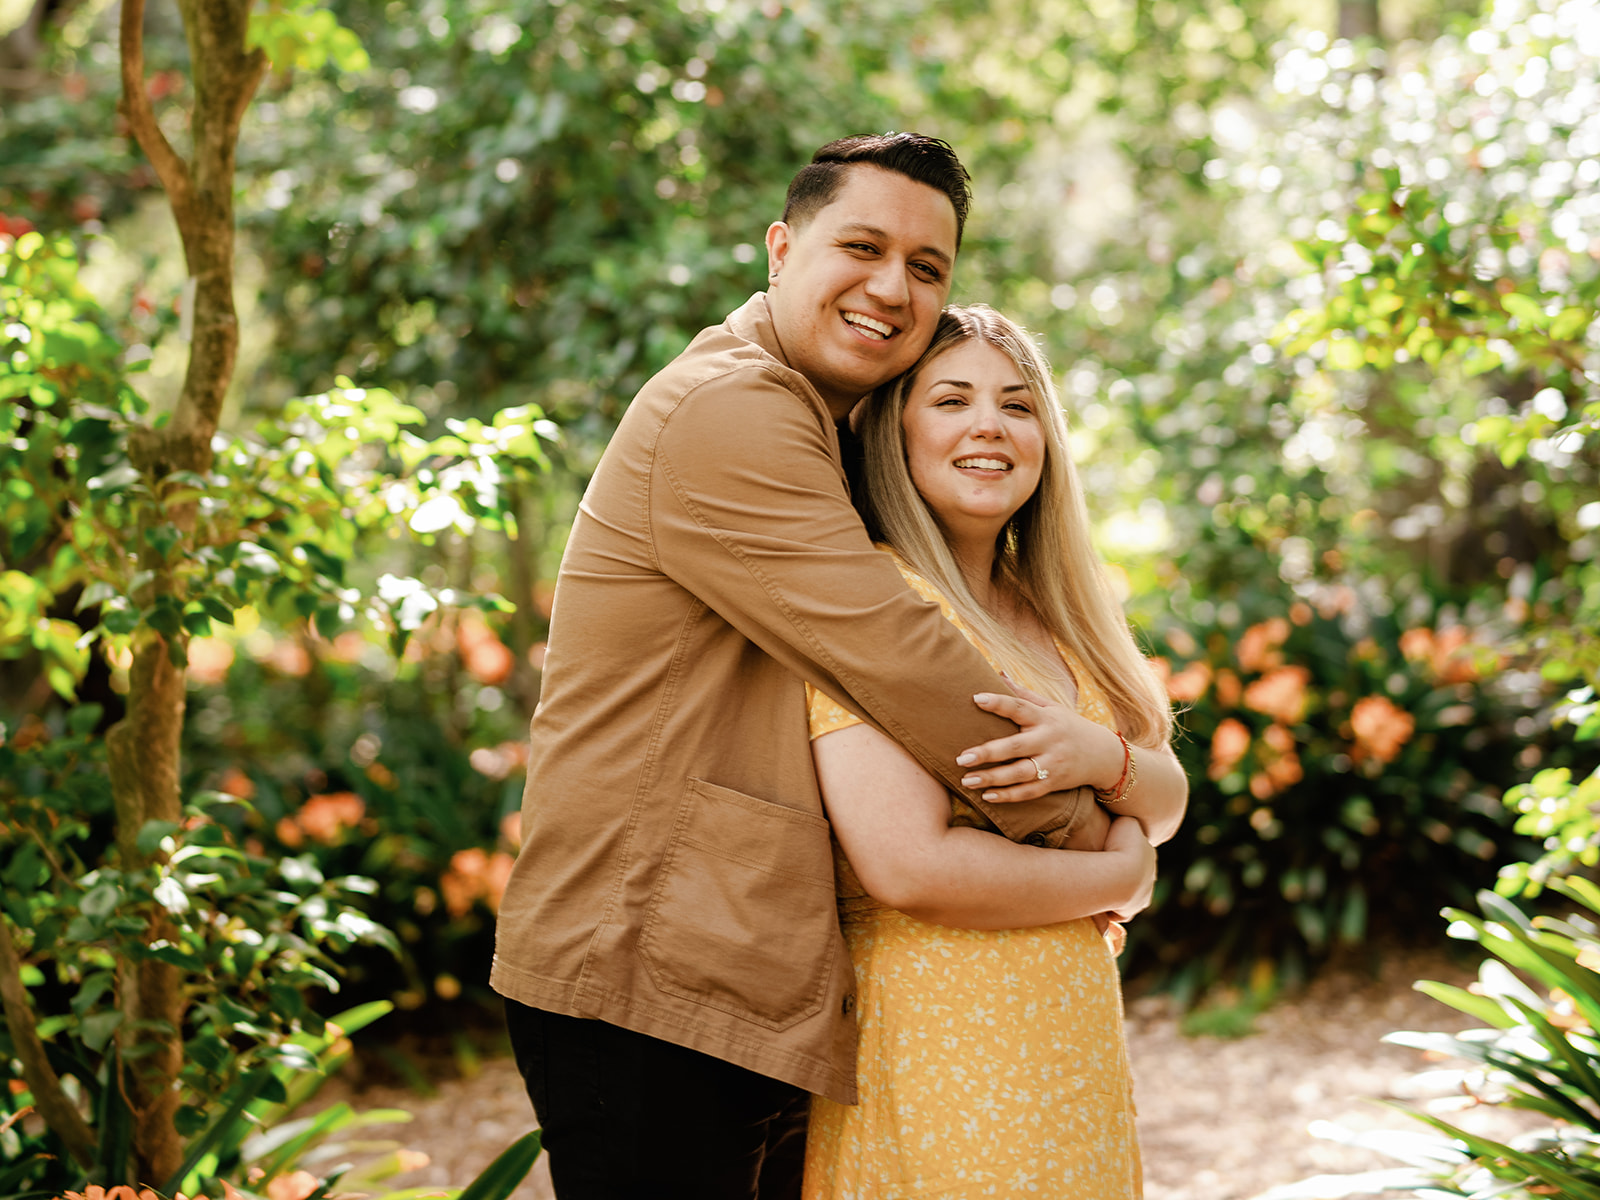 Proposal & Engagement Session - Decanso Gardens - Glendale, California - Outdoor portraits